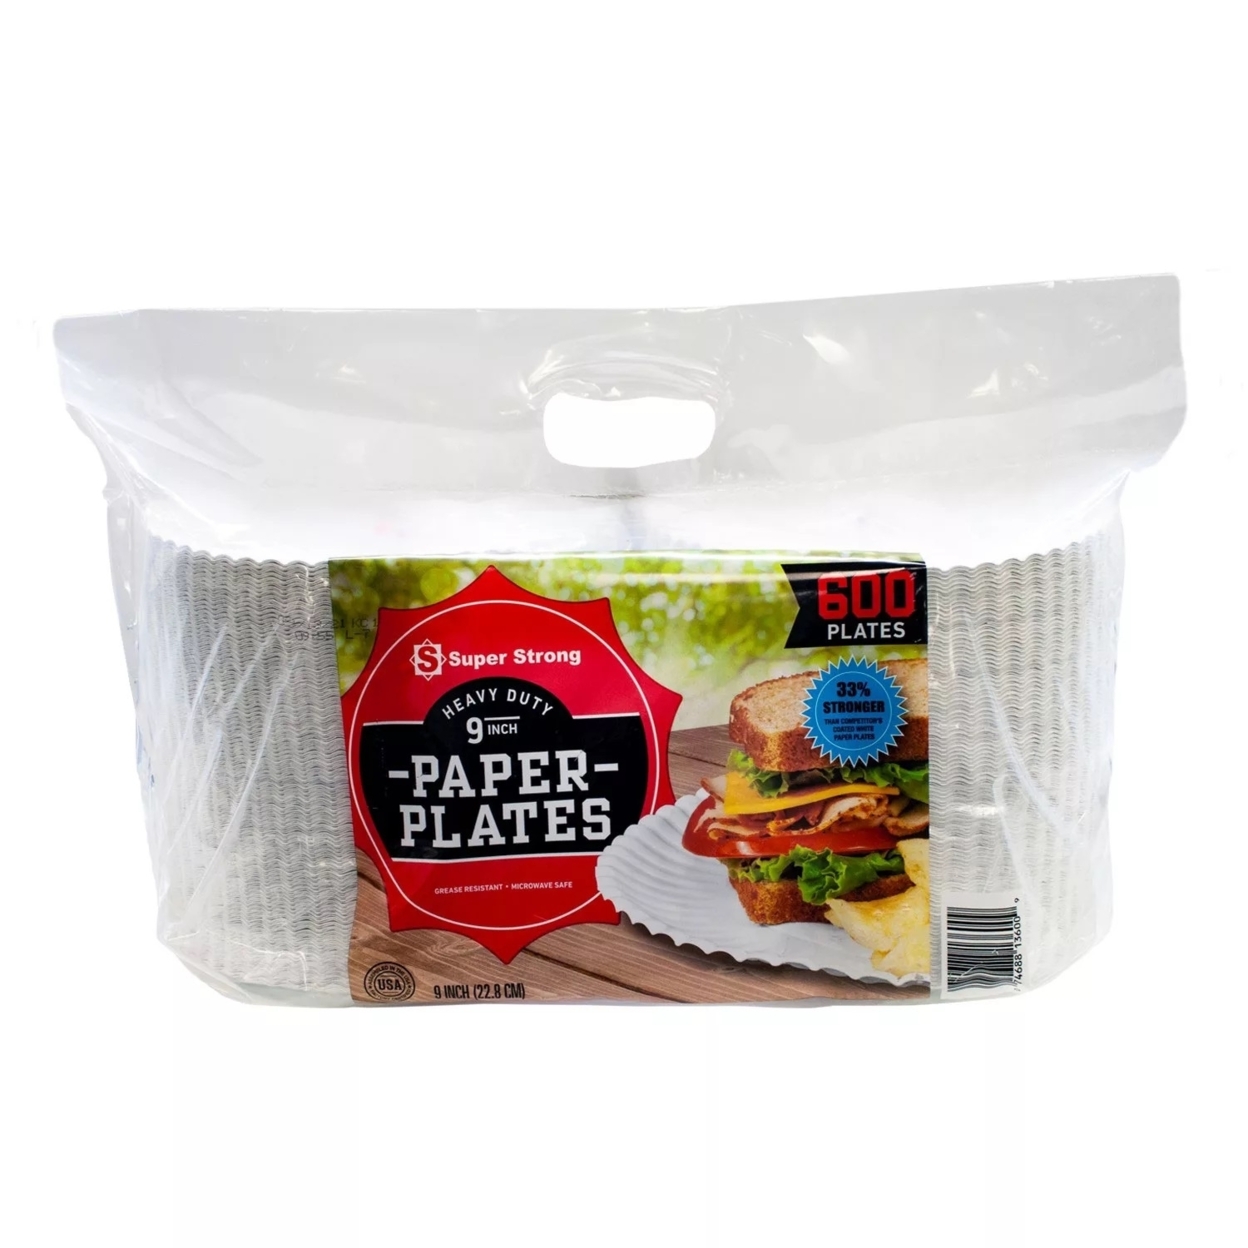 Super Strong Heavy-Duty Paper Plates, 9 (600 Count)